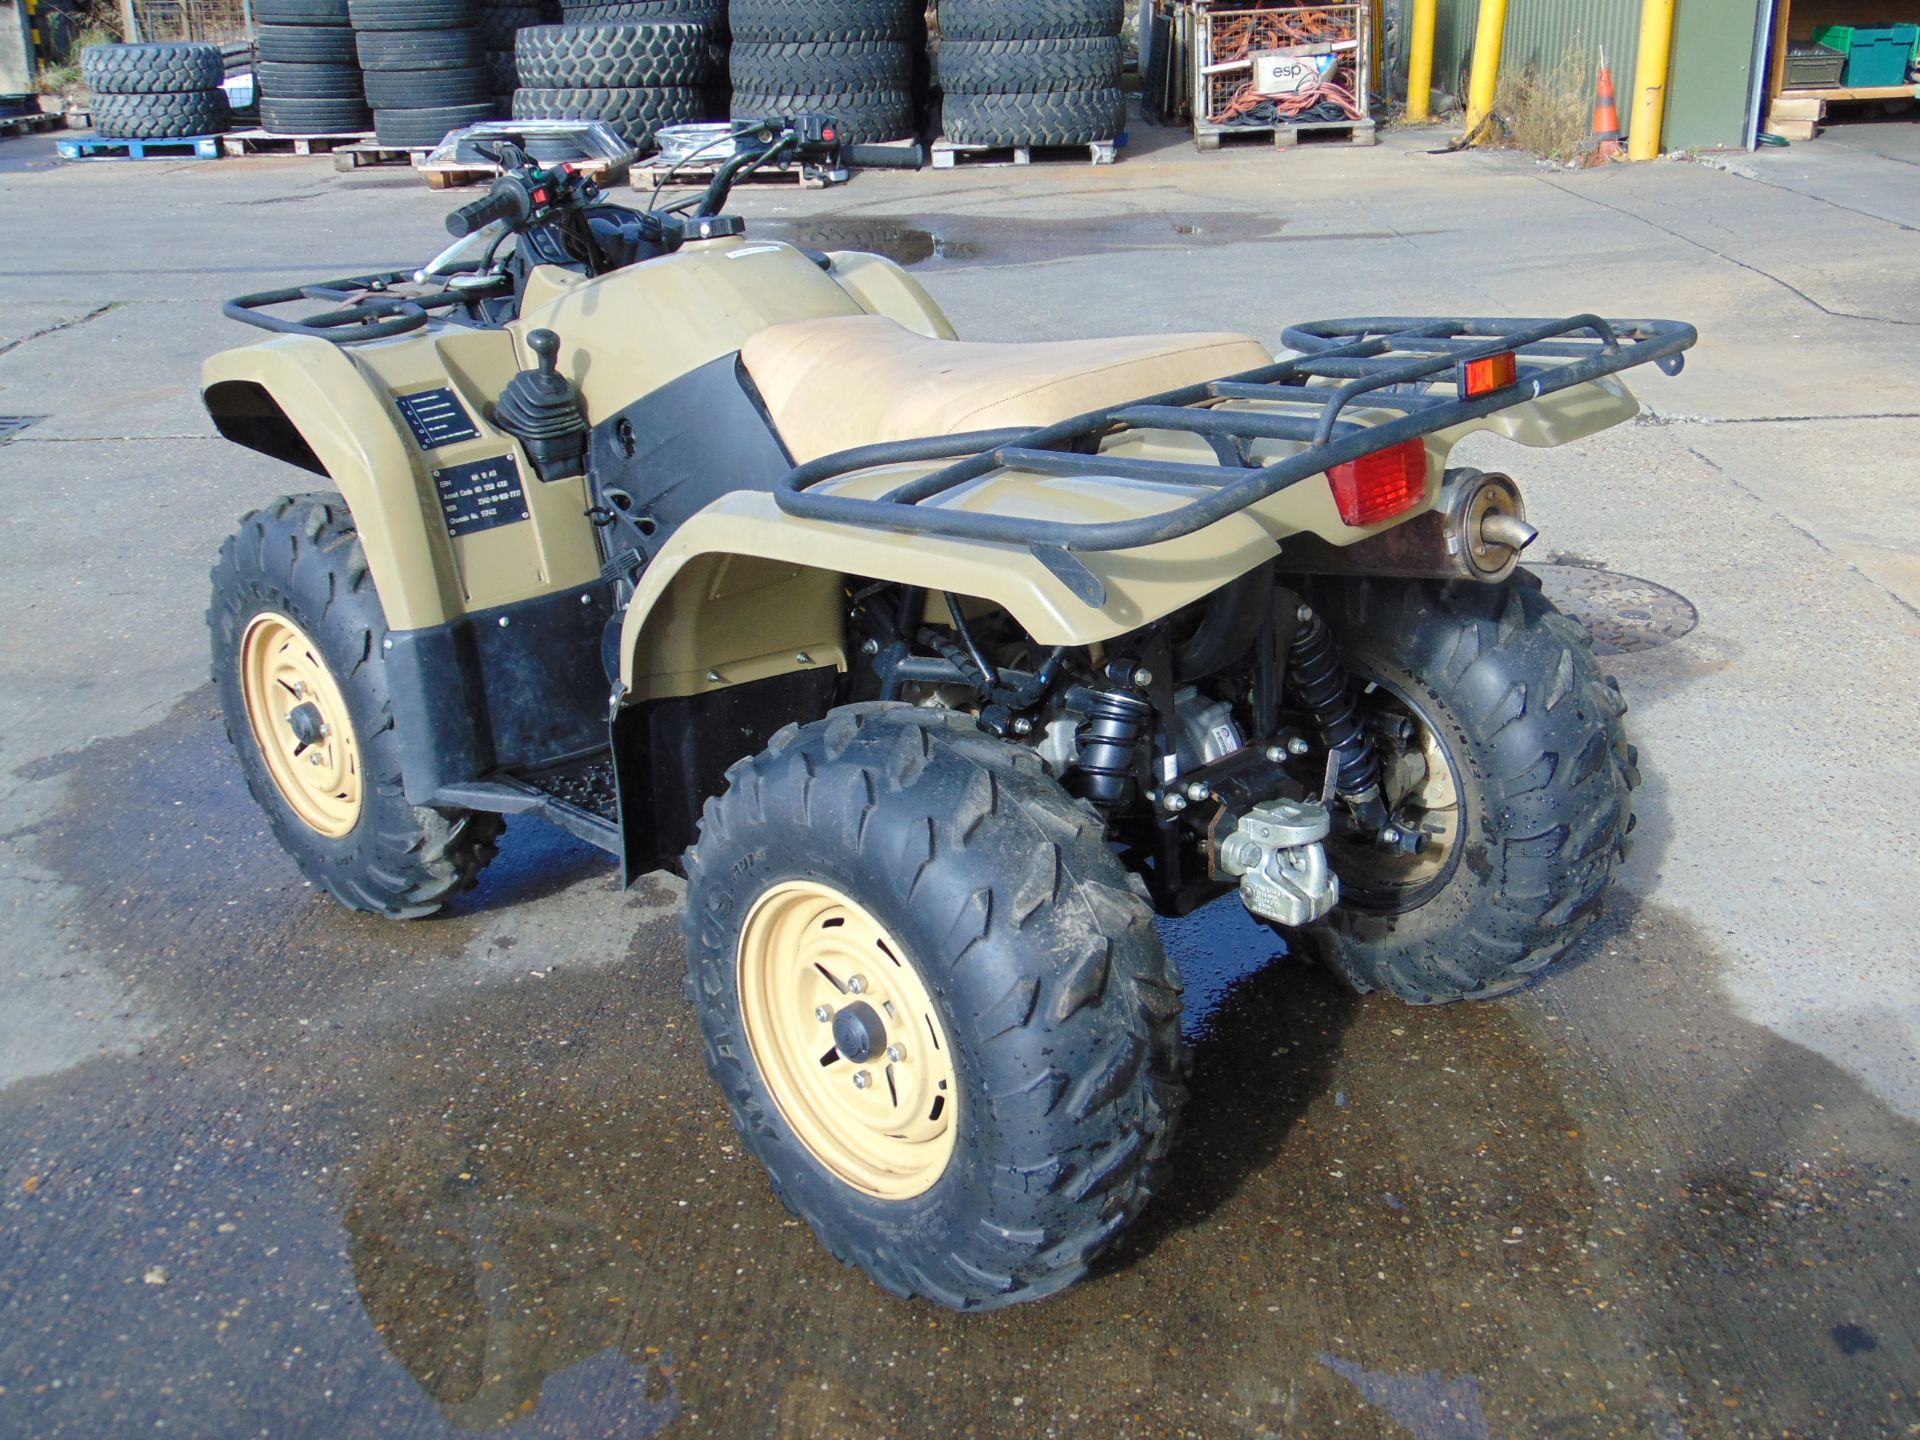 Military Specification Yamaha Grizzly 450 4 x 4 ATV Quad Bike ONLY 214 HOURS!!! - Image 6 of 22